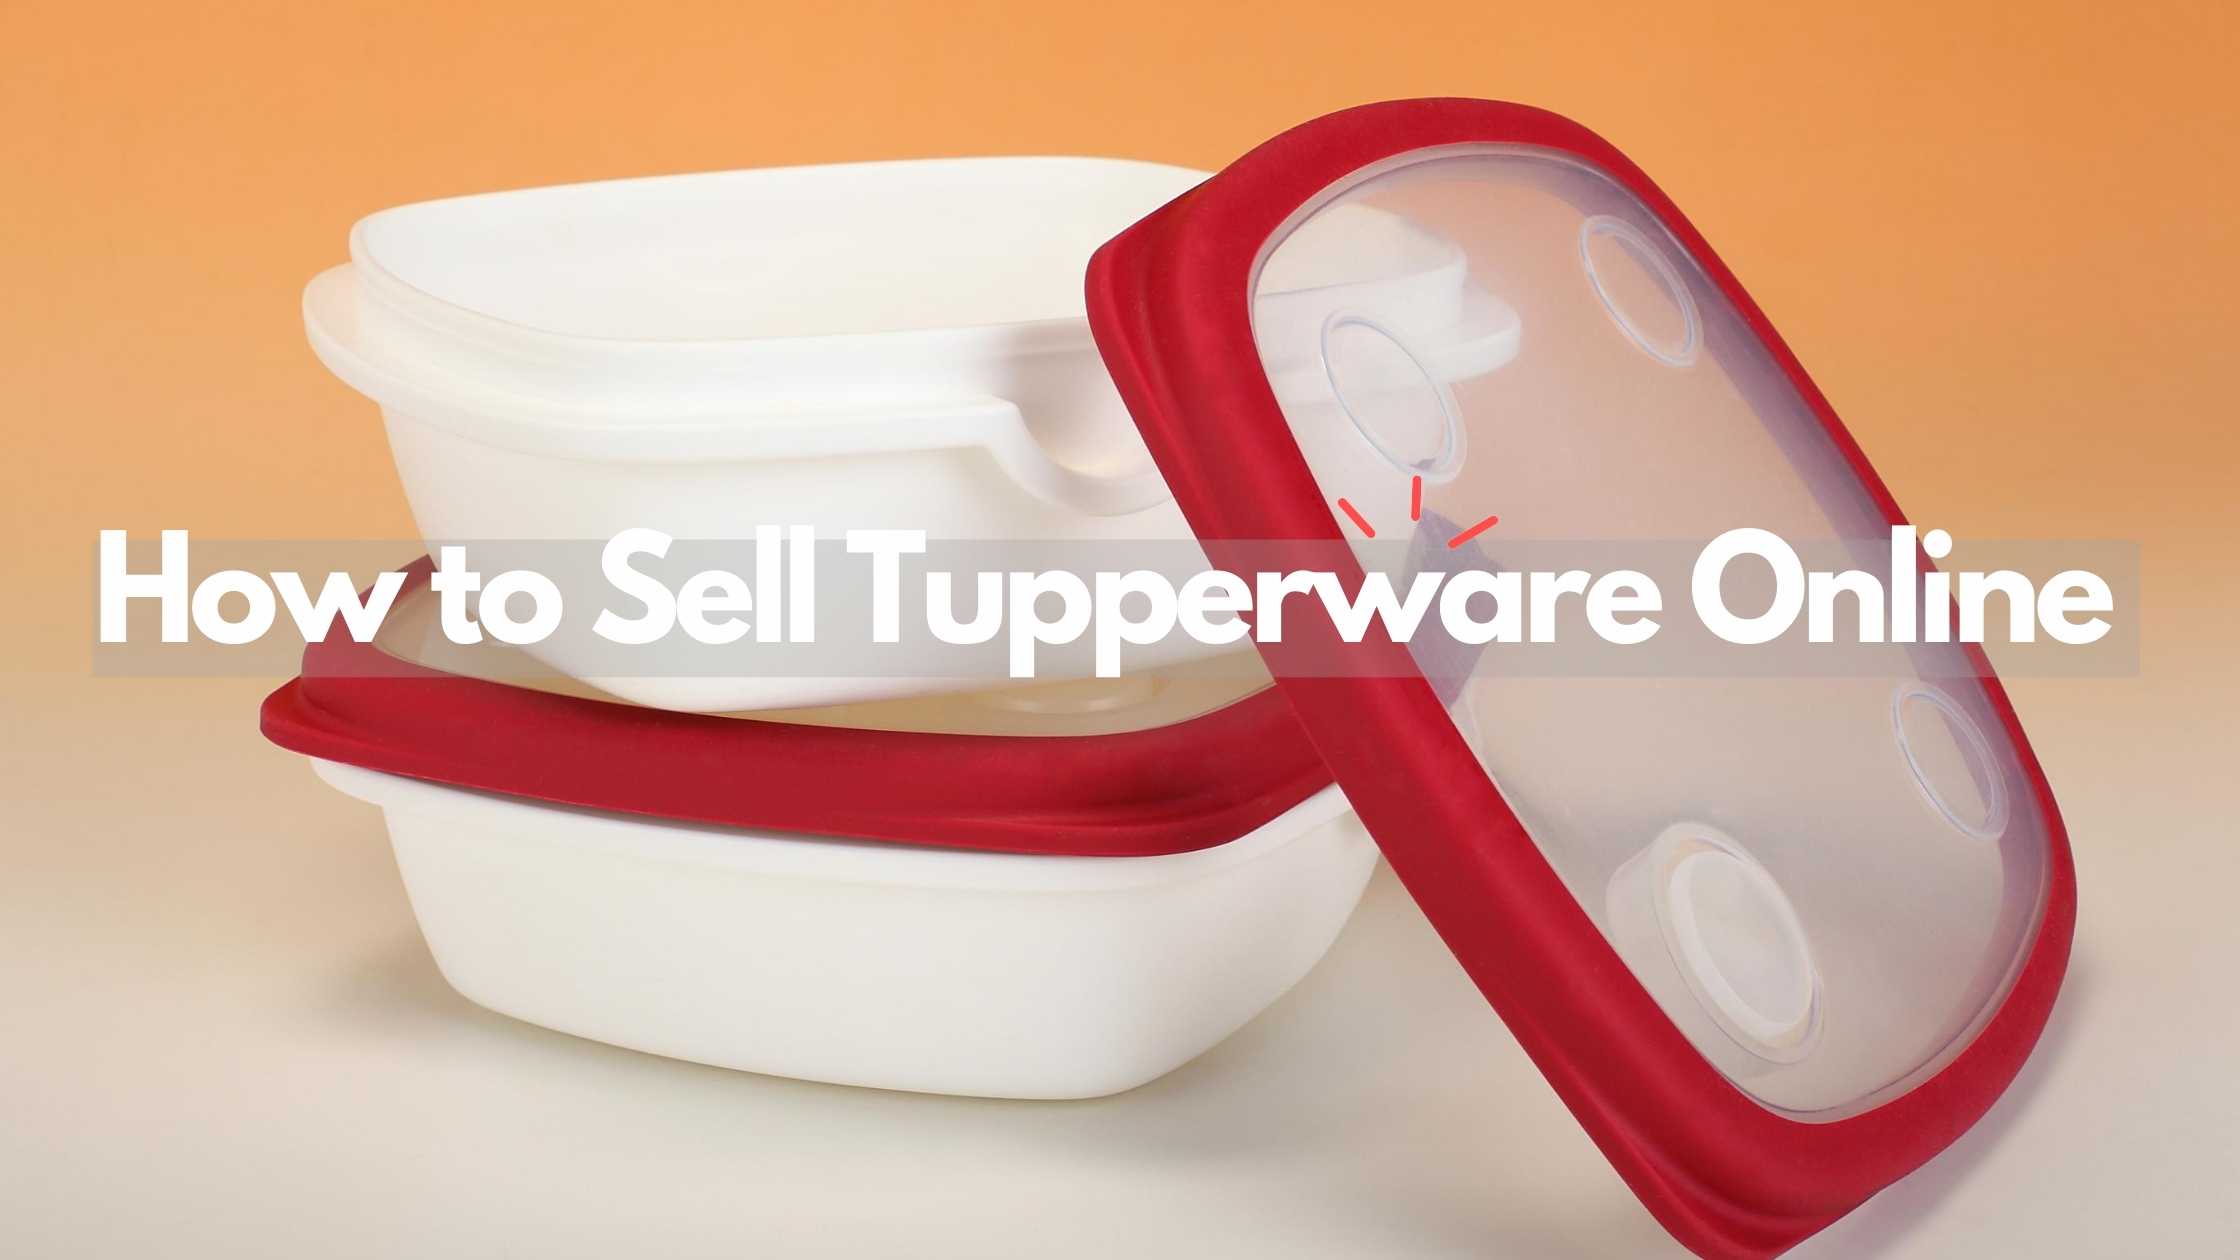 Here's How to Sell Tupperware | Sheepbuy Blog